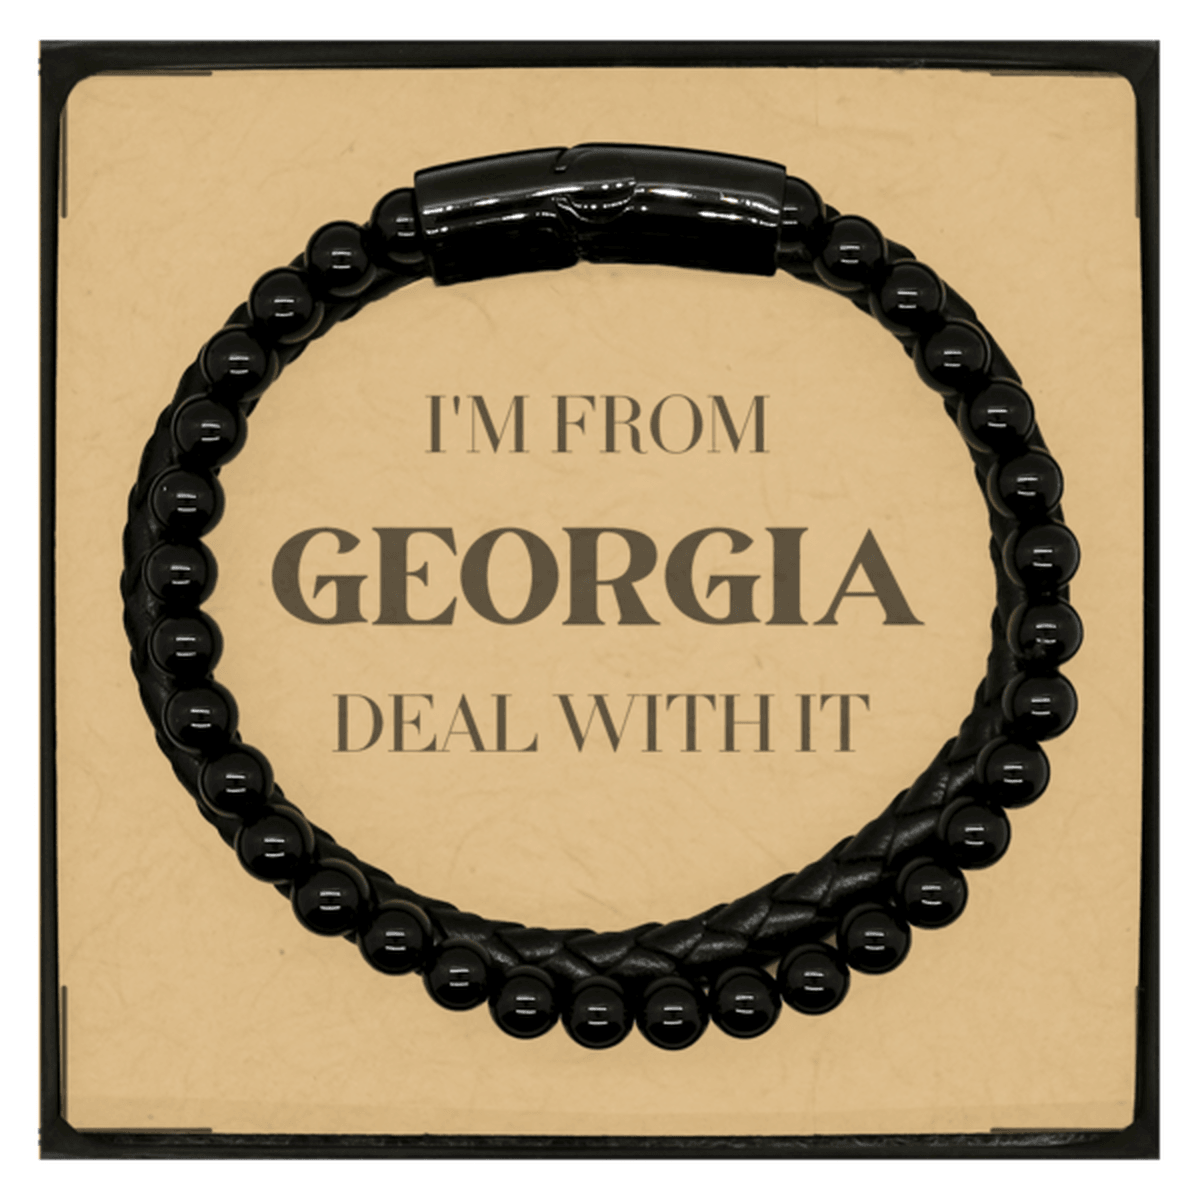 I'm from Georgia, Deal with it, Proud Georgia State Gifts, Georgia Stone Leather Bracelets Gift Idea, Christmas Gifts for Georgia People, Coworkers, Colleague - Mallard Moon Gift Shop